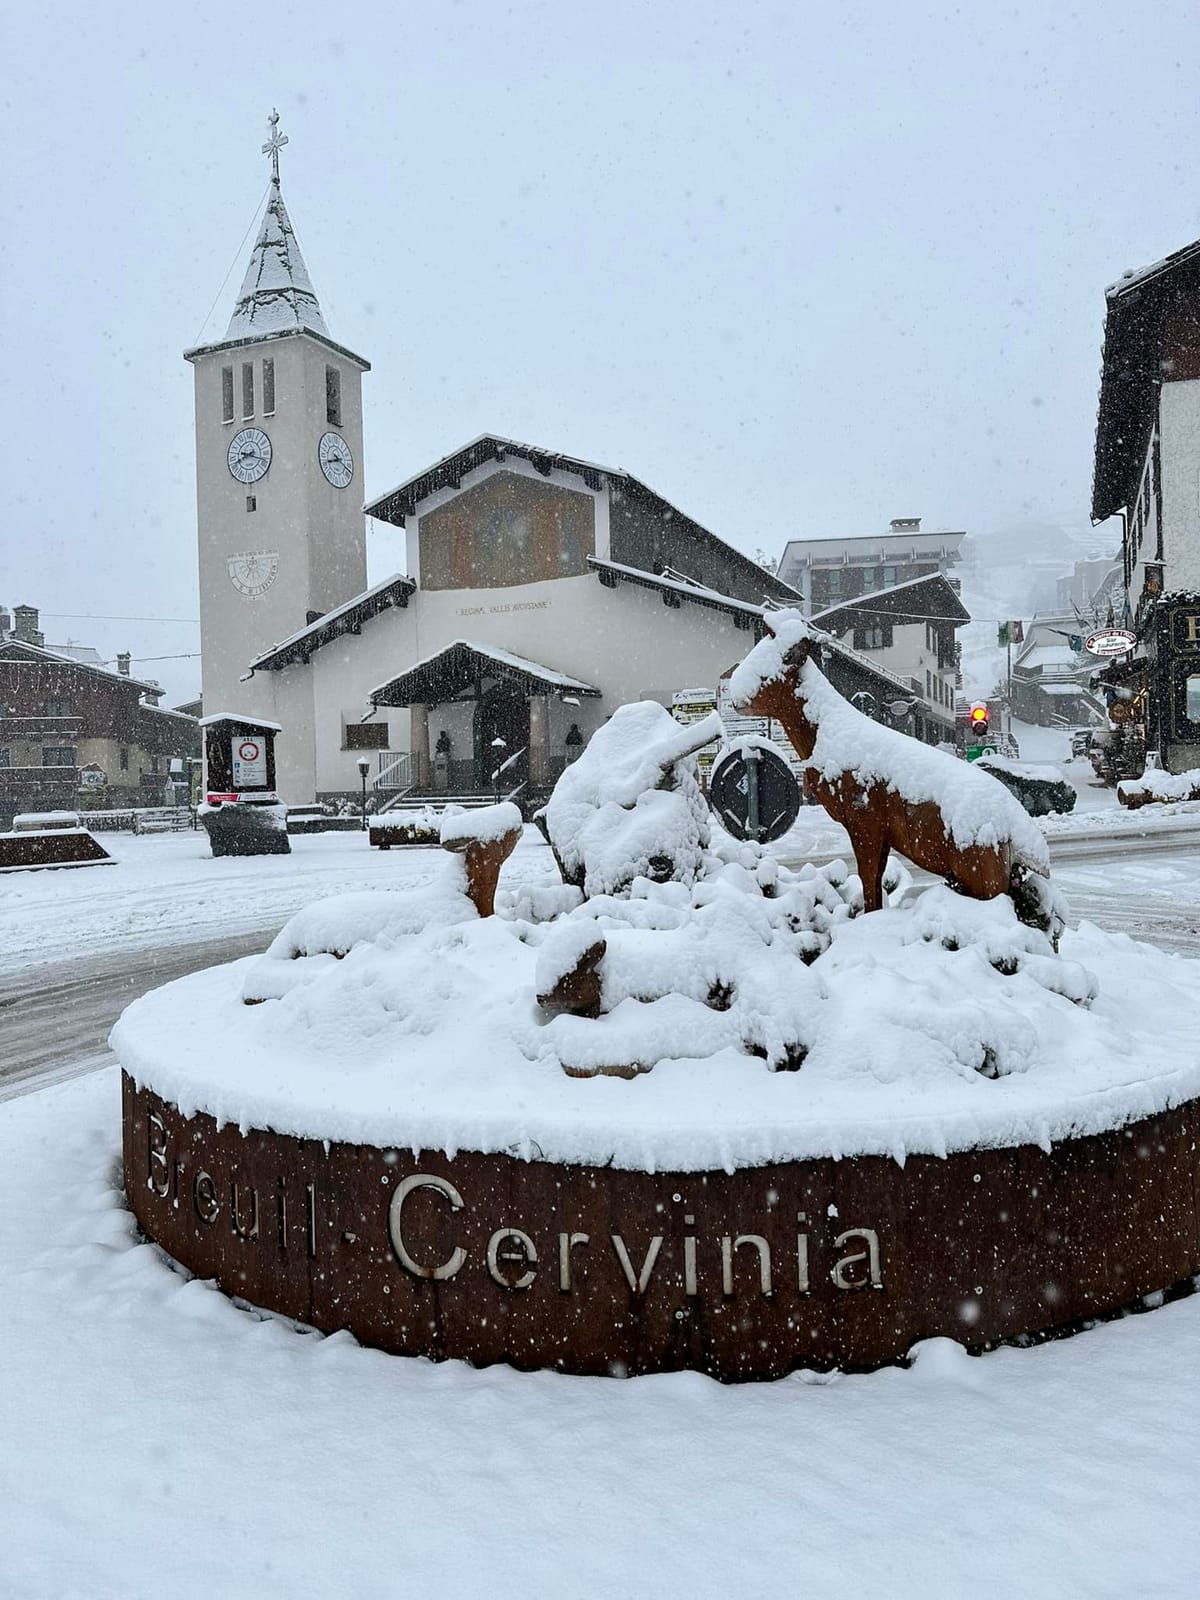 Italy's Cervinia Says It Will Offer Skiing Year-Round